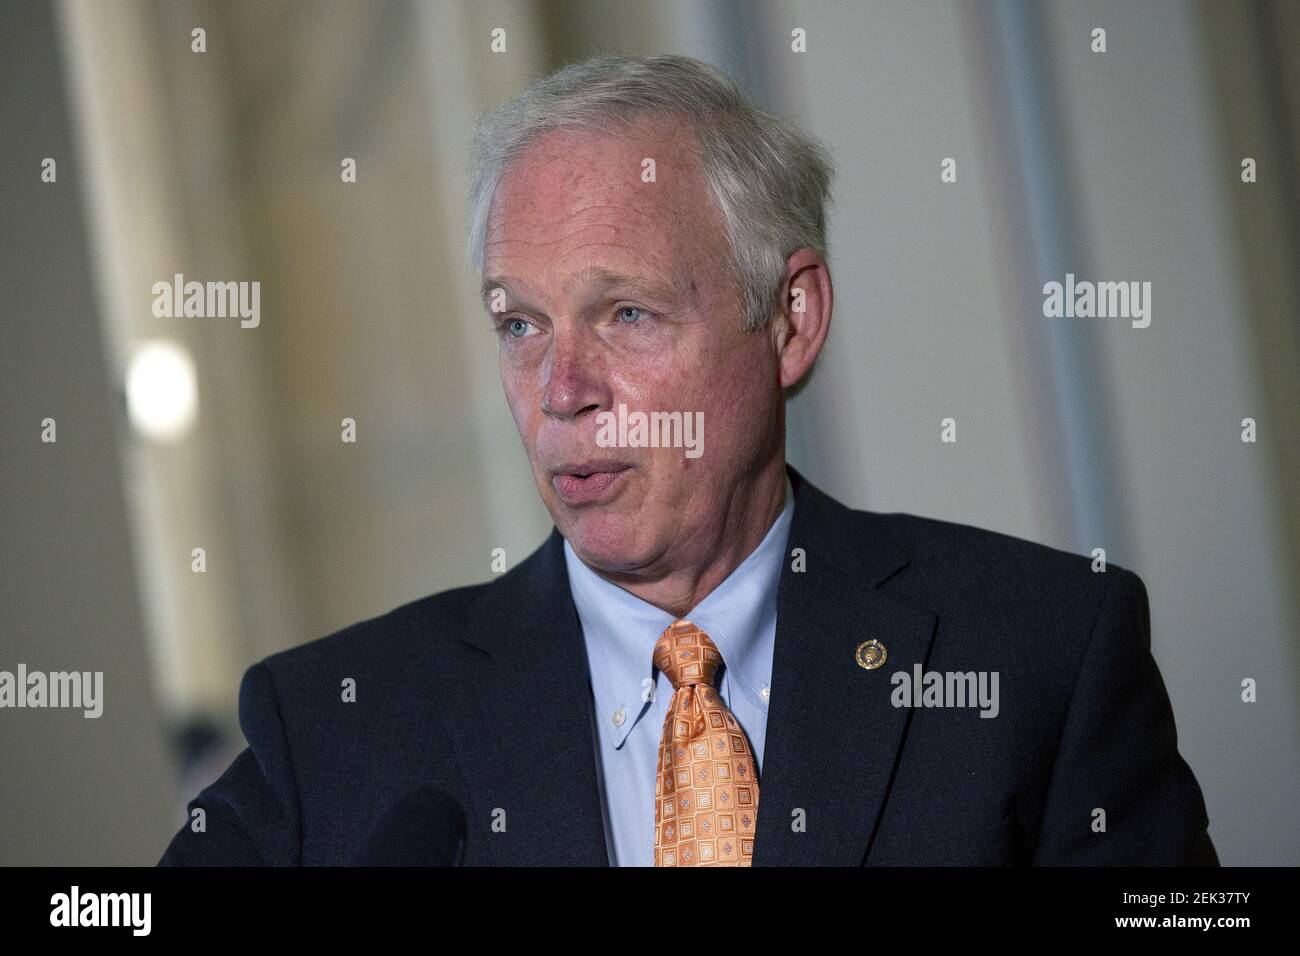 United States Senator Ron Johnson (Republican of Wisconsin) speaks to members of the media prior to a U.S. Senate Committee on Homeland Security and Governmental Affairs meeting in the Senate Russell Office Building in Washington D.C., U.S., on Wednesday, May 20, 2020, as the committee considers a motion to issue a subpoena to Blue Star Strategies. Credit: Stefani Reynolds / CNP/Sipa USA Stock Photo